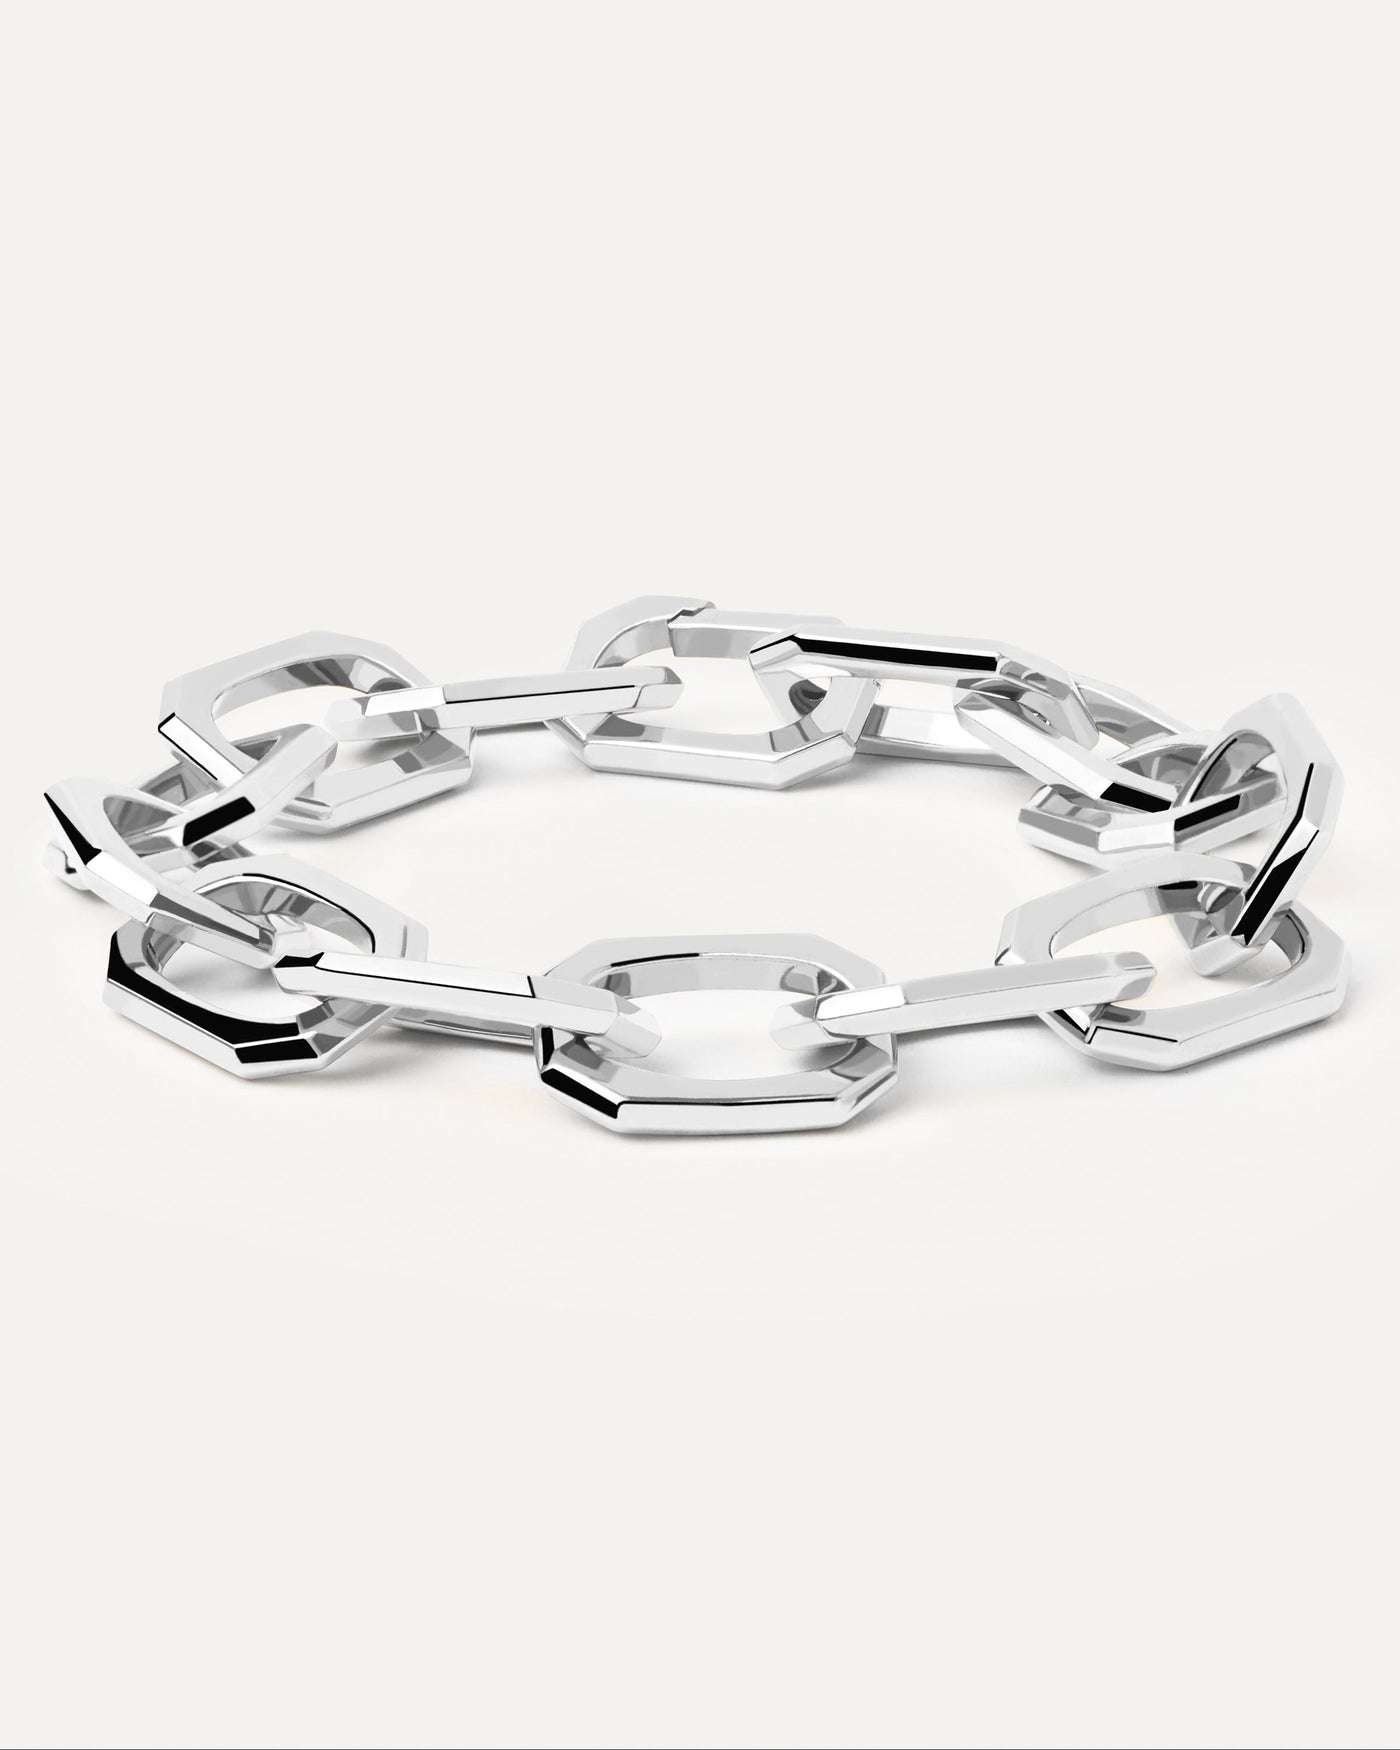 2023 Selection | Large Signature Chain Silver Bracelet. Cable chain bracelet with big octogonal links in silver rhodium plating. Get the latest arrival from PDPAOLA. Place your order safely and get this Best Seller. Free Shipping.